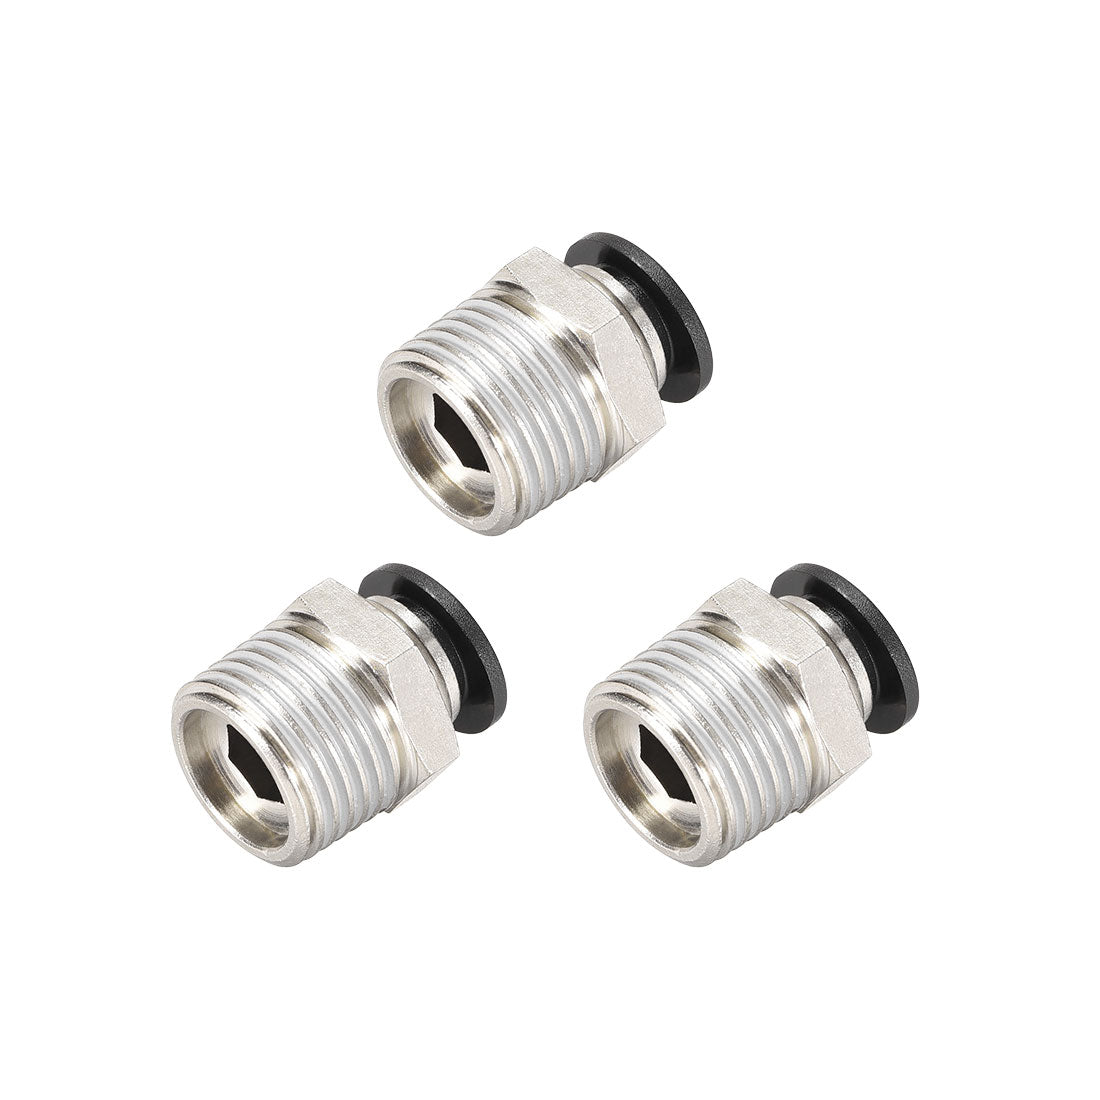 uxcell Uxcell Straight Pneumatic Push to Quick Connect Fittings 1/2NPT Male x 10mm Tube OD Silver Tone 3pcs